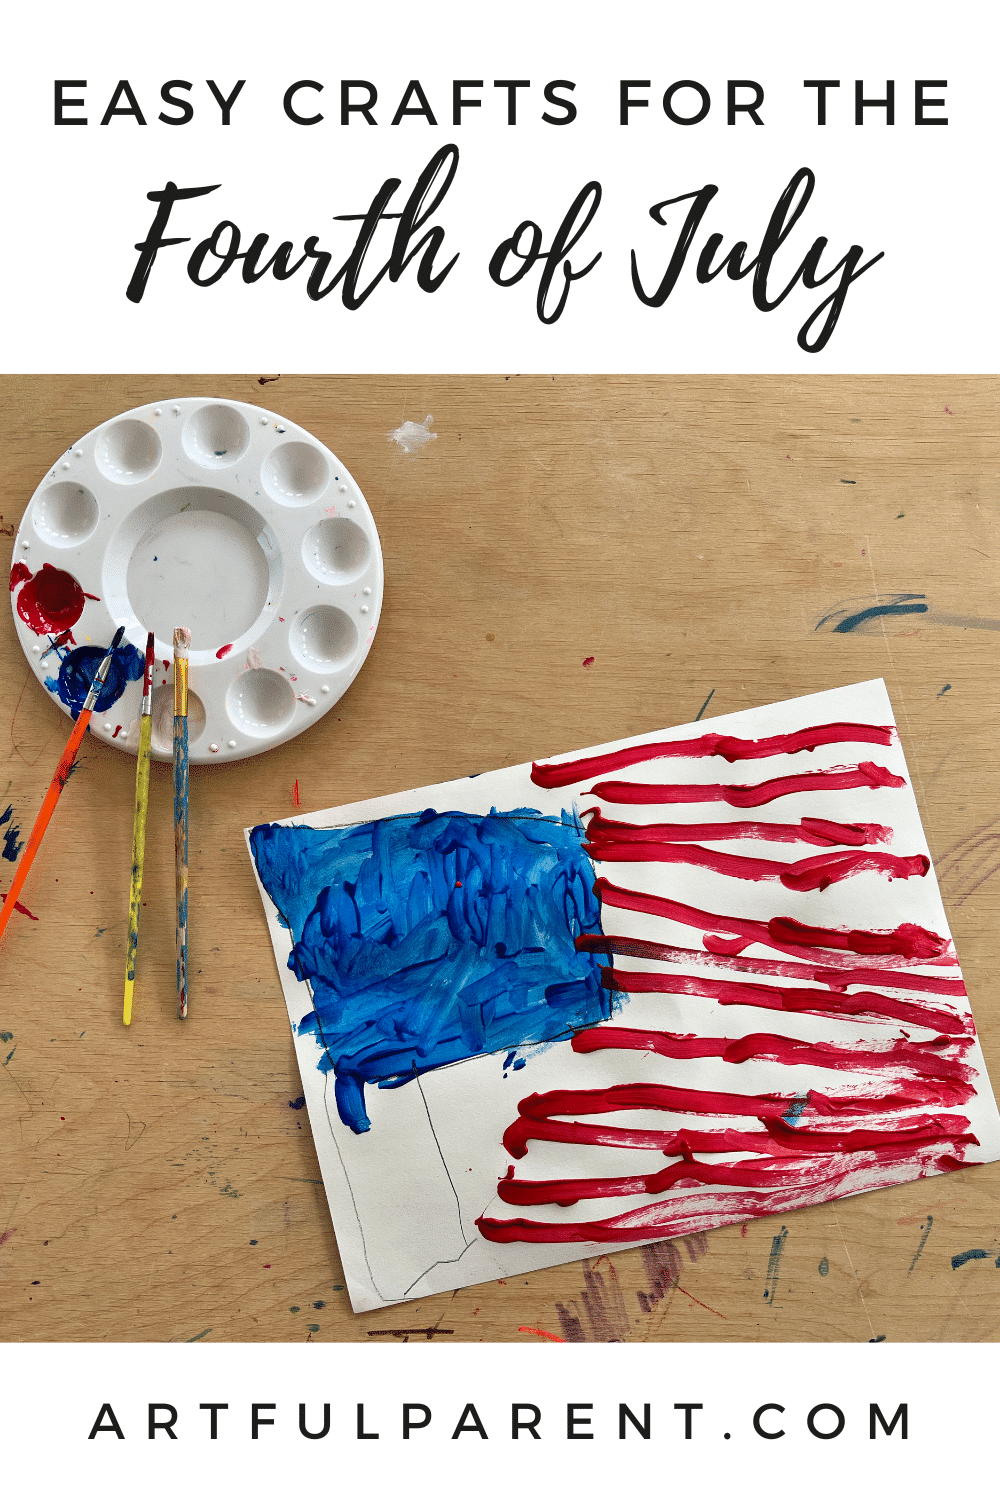 11 Easy Crafts for Fourth of July